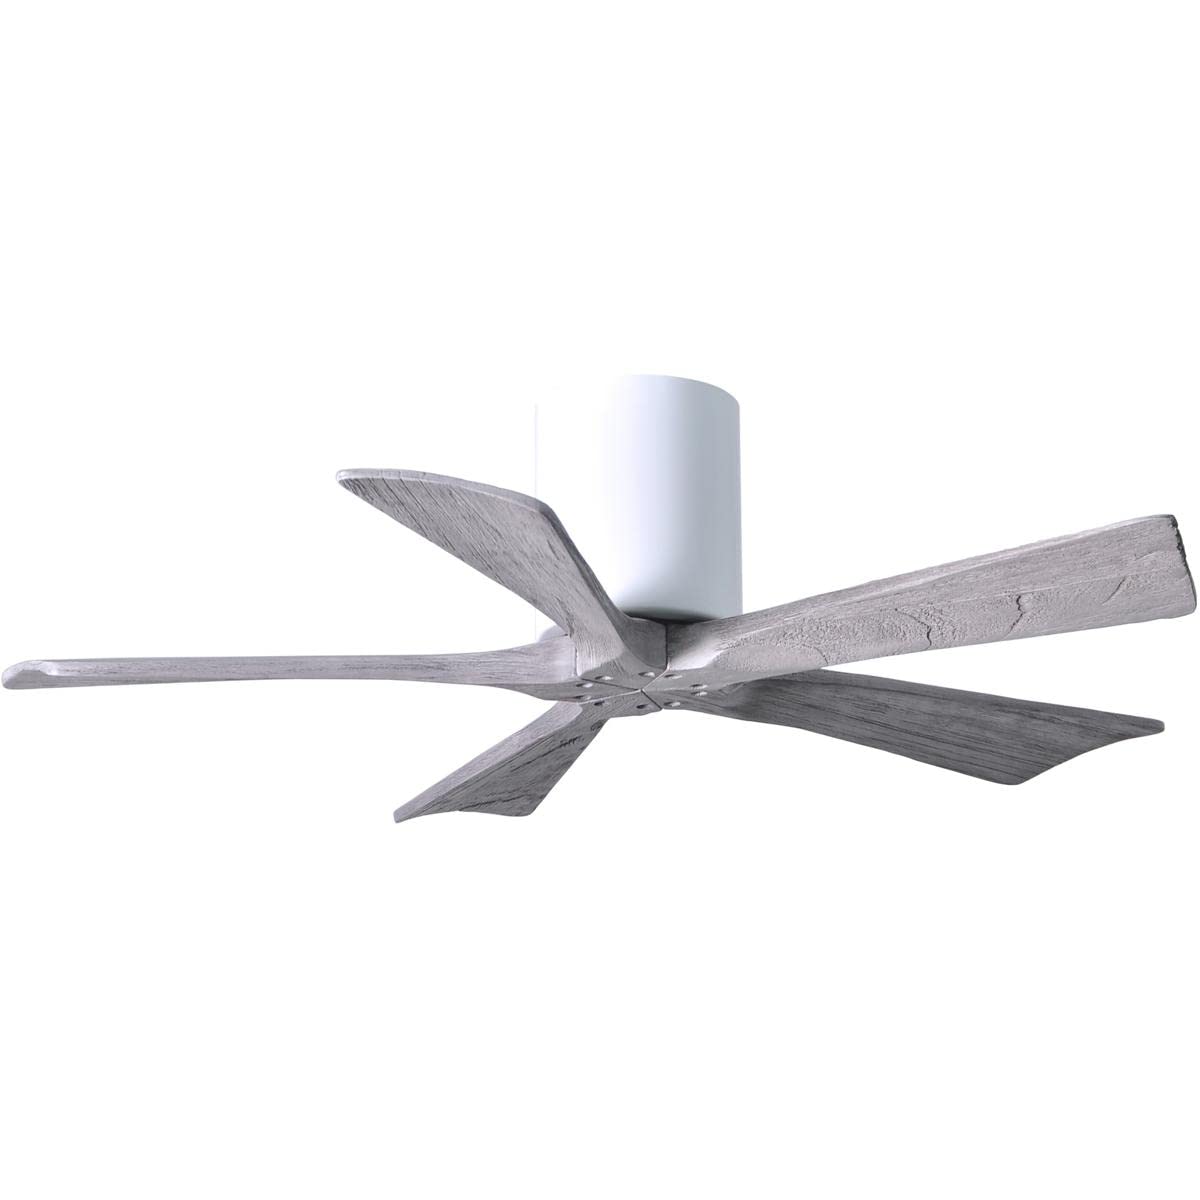 Matthews Fan IR5H-WH-BW-42 Irene-5H five-blade flush mount paddle fan in Gloss White finish with 42” solid barn wood tone blades. 